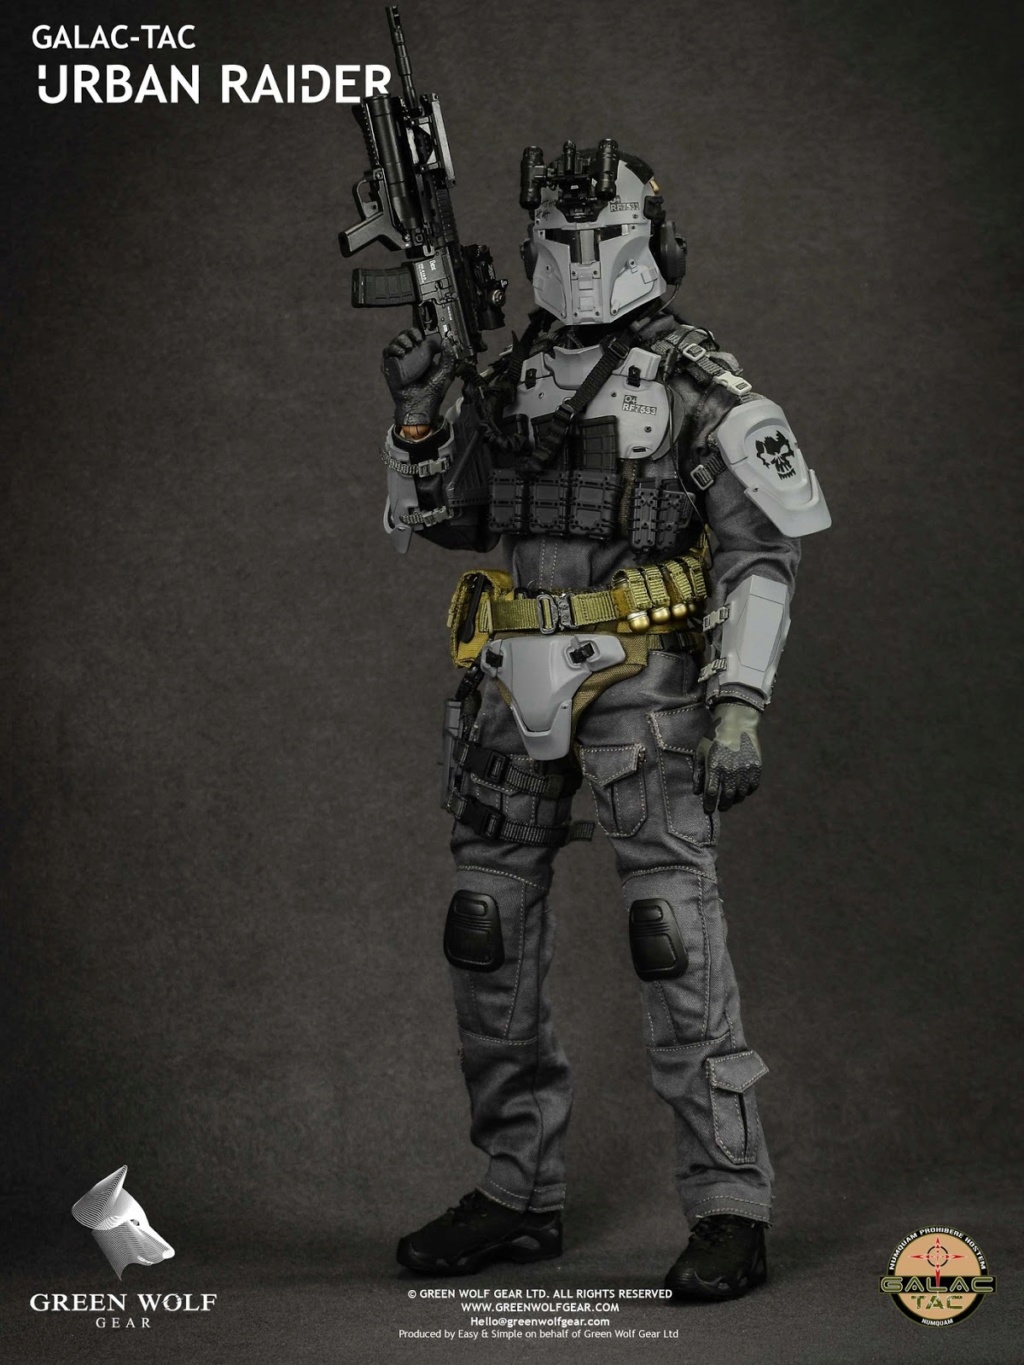 GreenWolfGear - NEW PRODUCT: Green Wolf Gear 1/6th scale GALAC-TAC Urban Raider 12-inch action figure 294